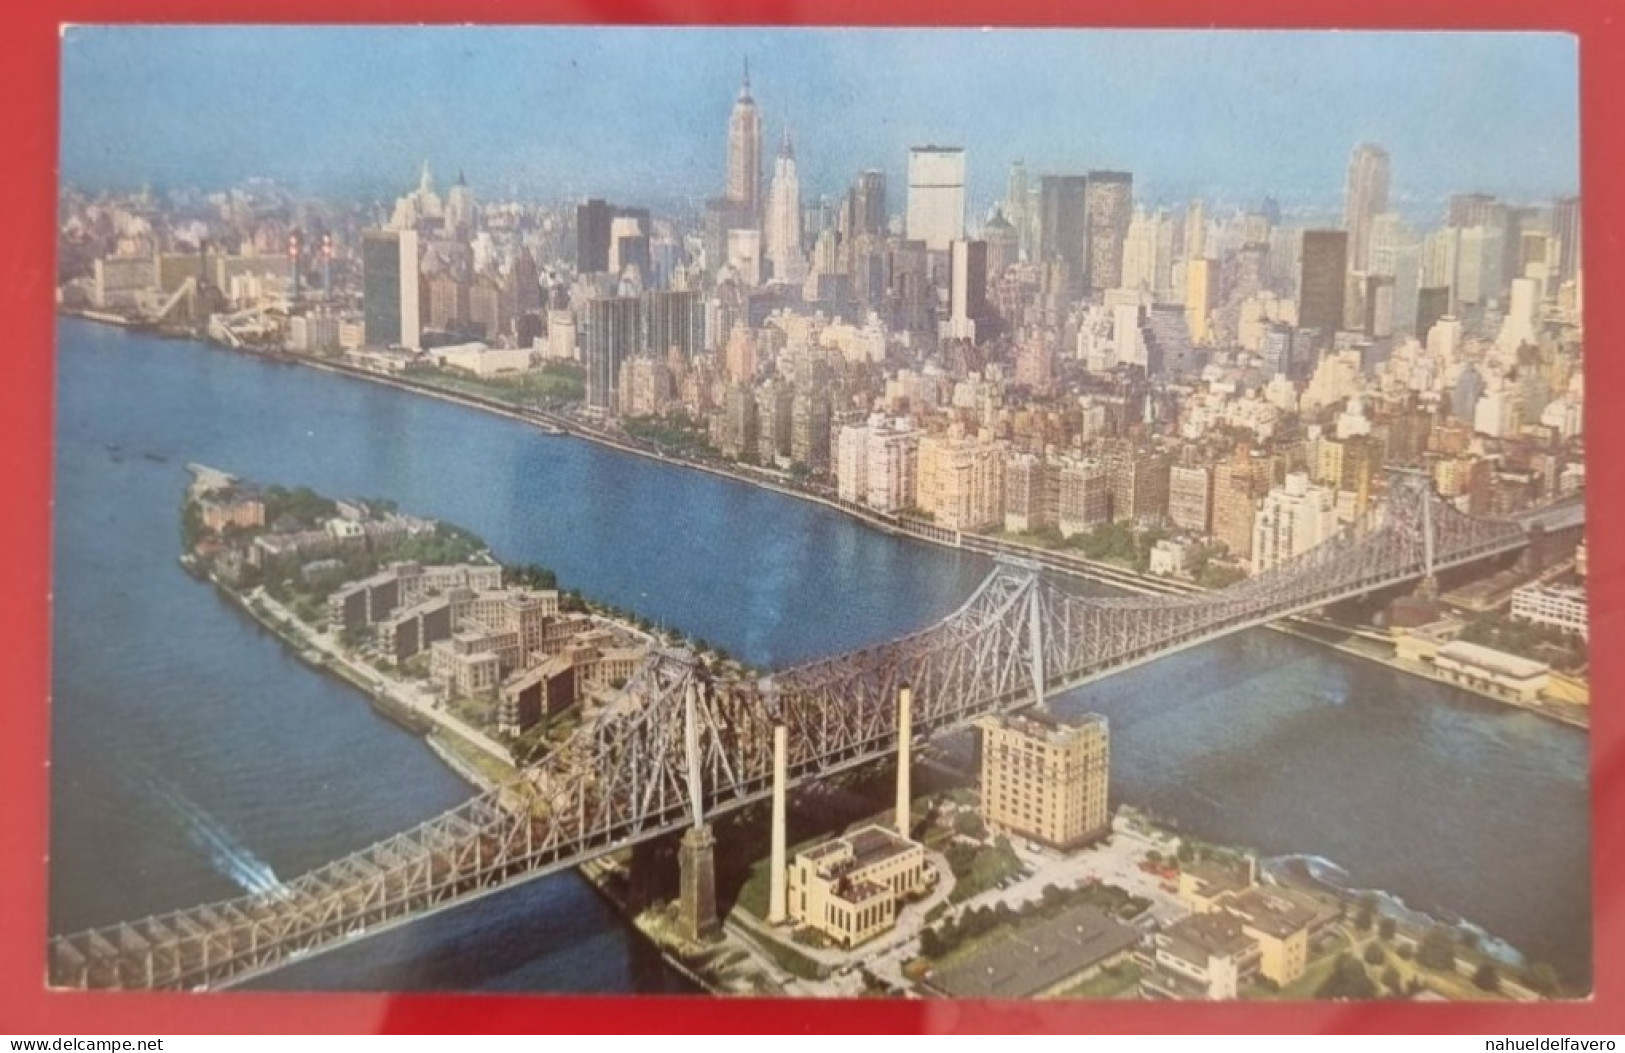 Uncirculated Postcard - USA - NY, NEW YORK CITY - AERIAL VIEW OF 59TH ST. BRIDGE - Bridges & Tunnels